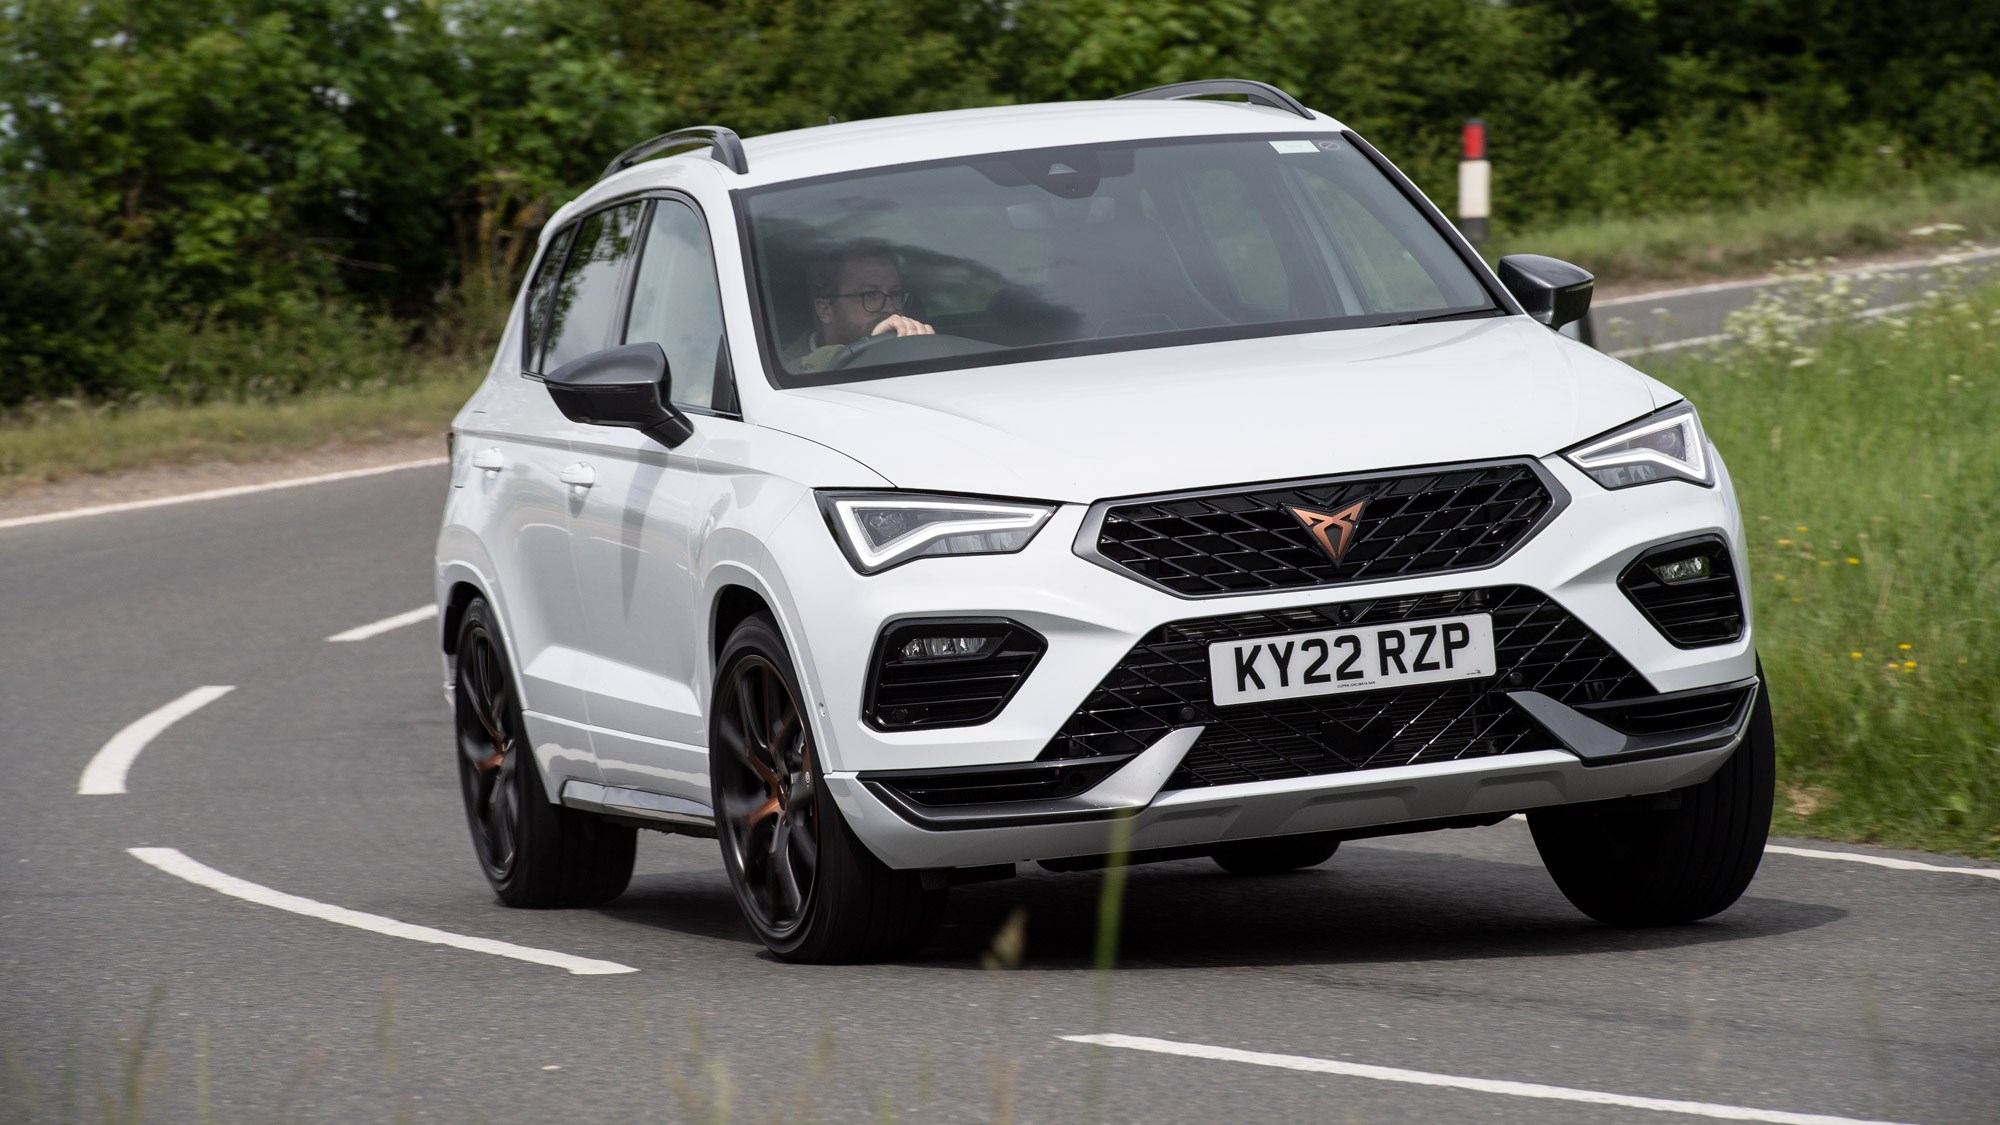 2022 Cupra Formentor review: Fast small SUV to tackle Kona N, T-Roc R -  launching new brand